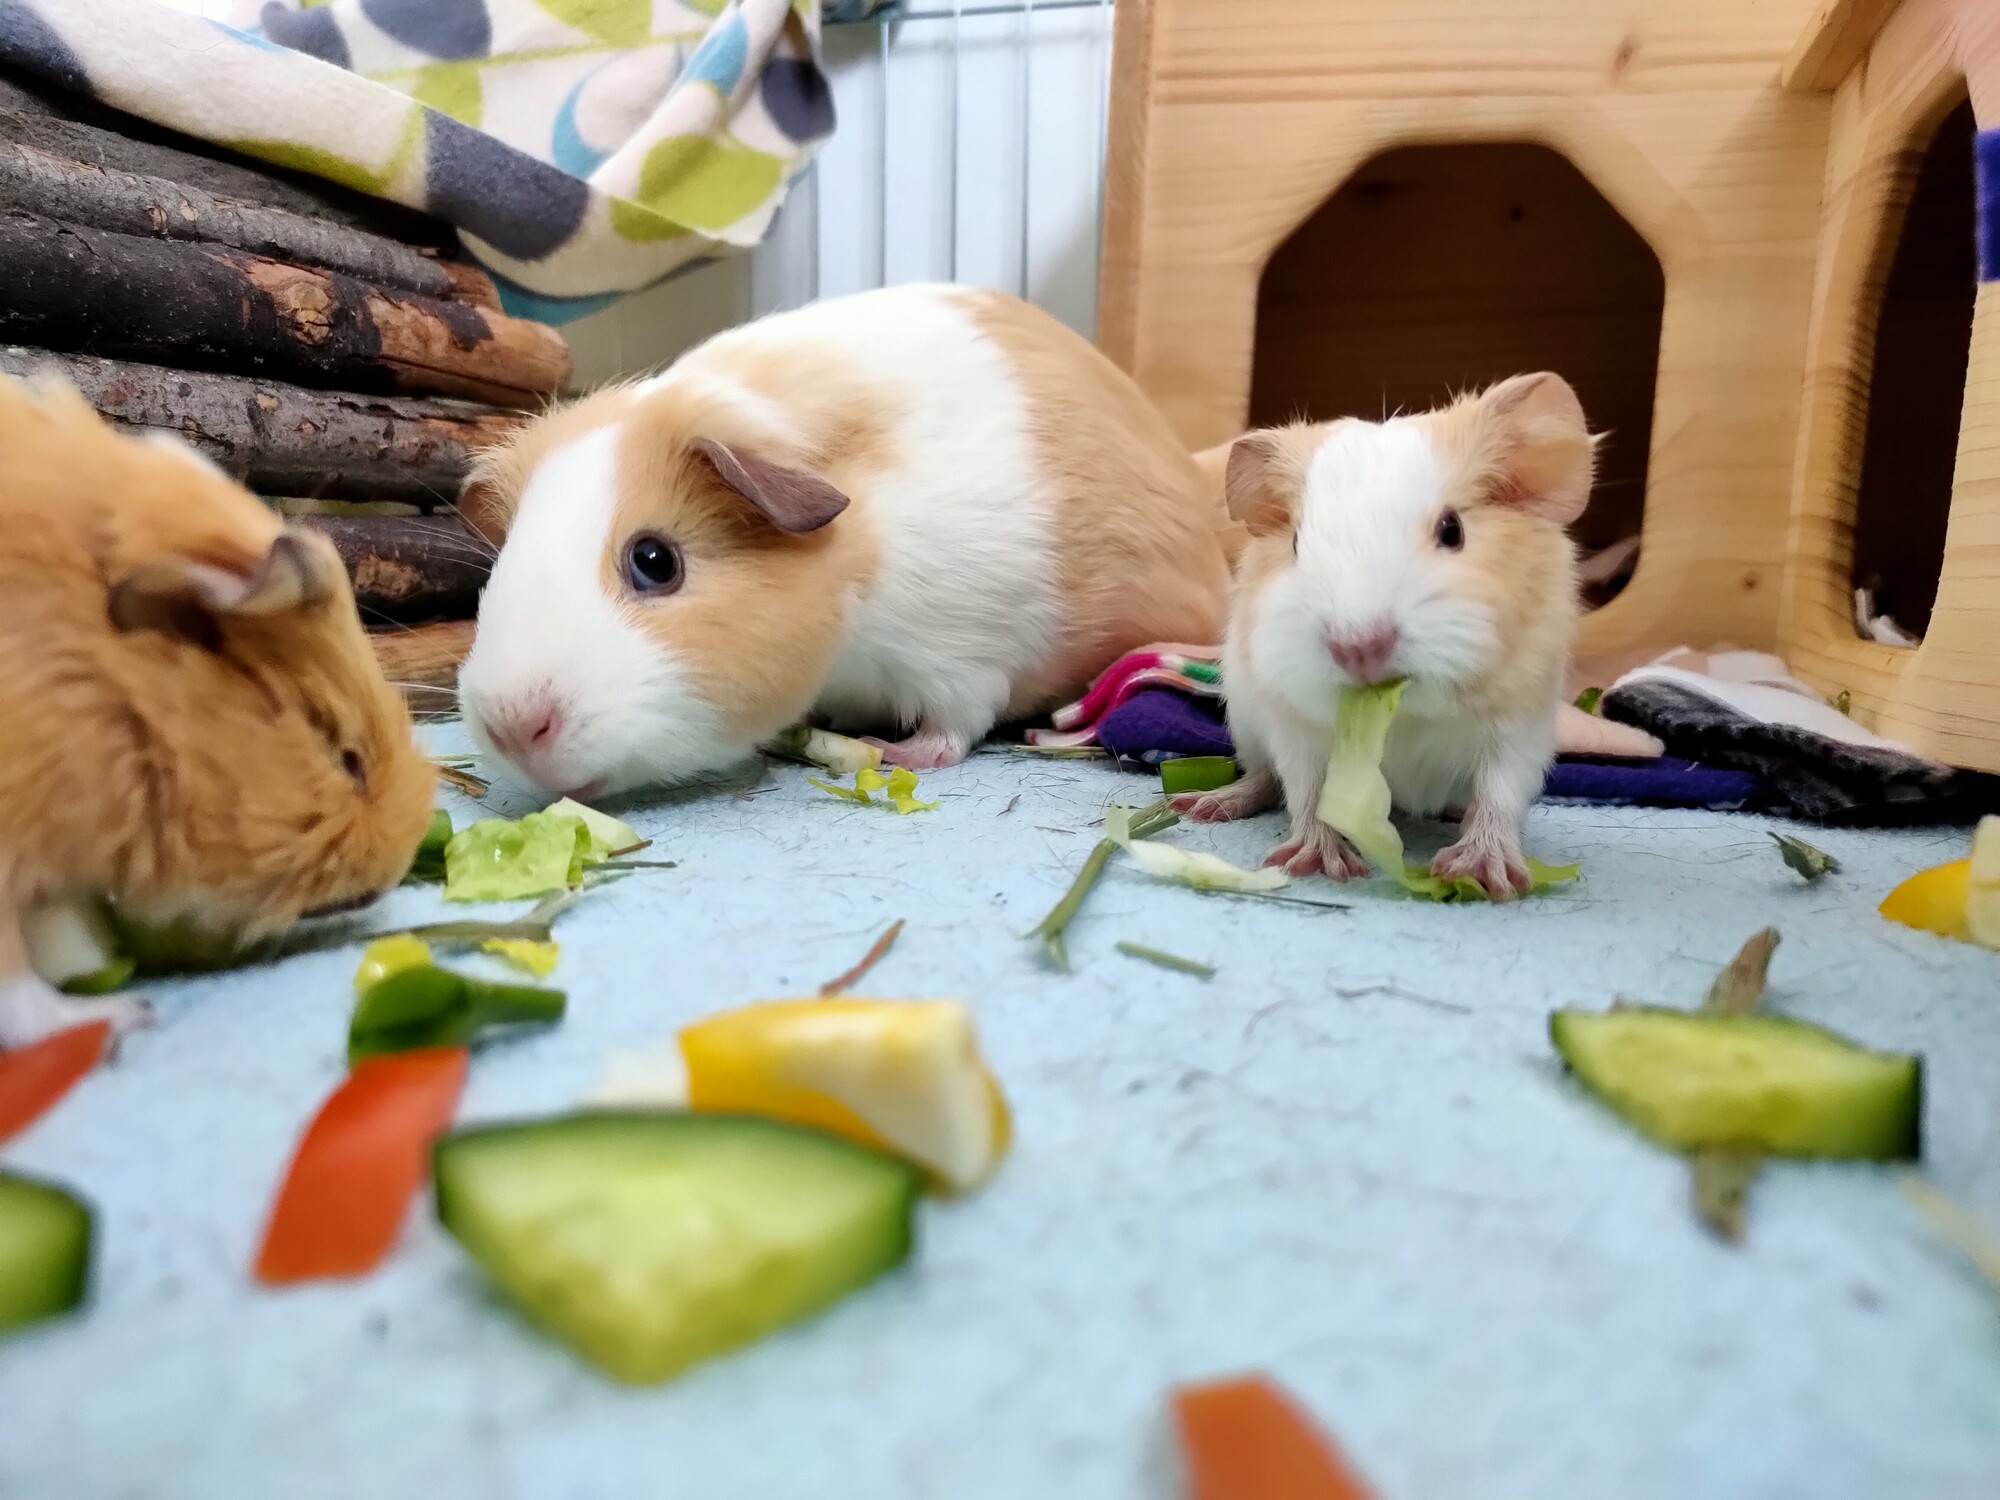 Three of the babies munching on some vegetables